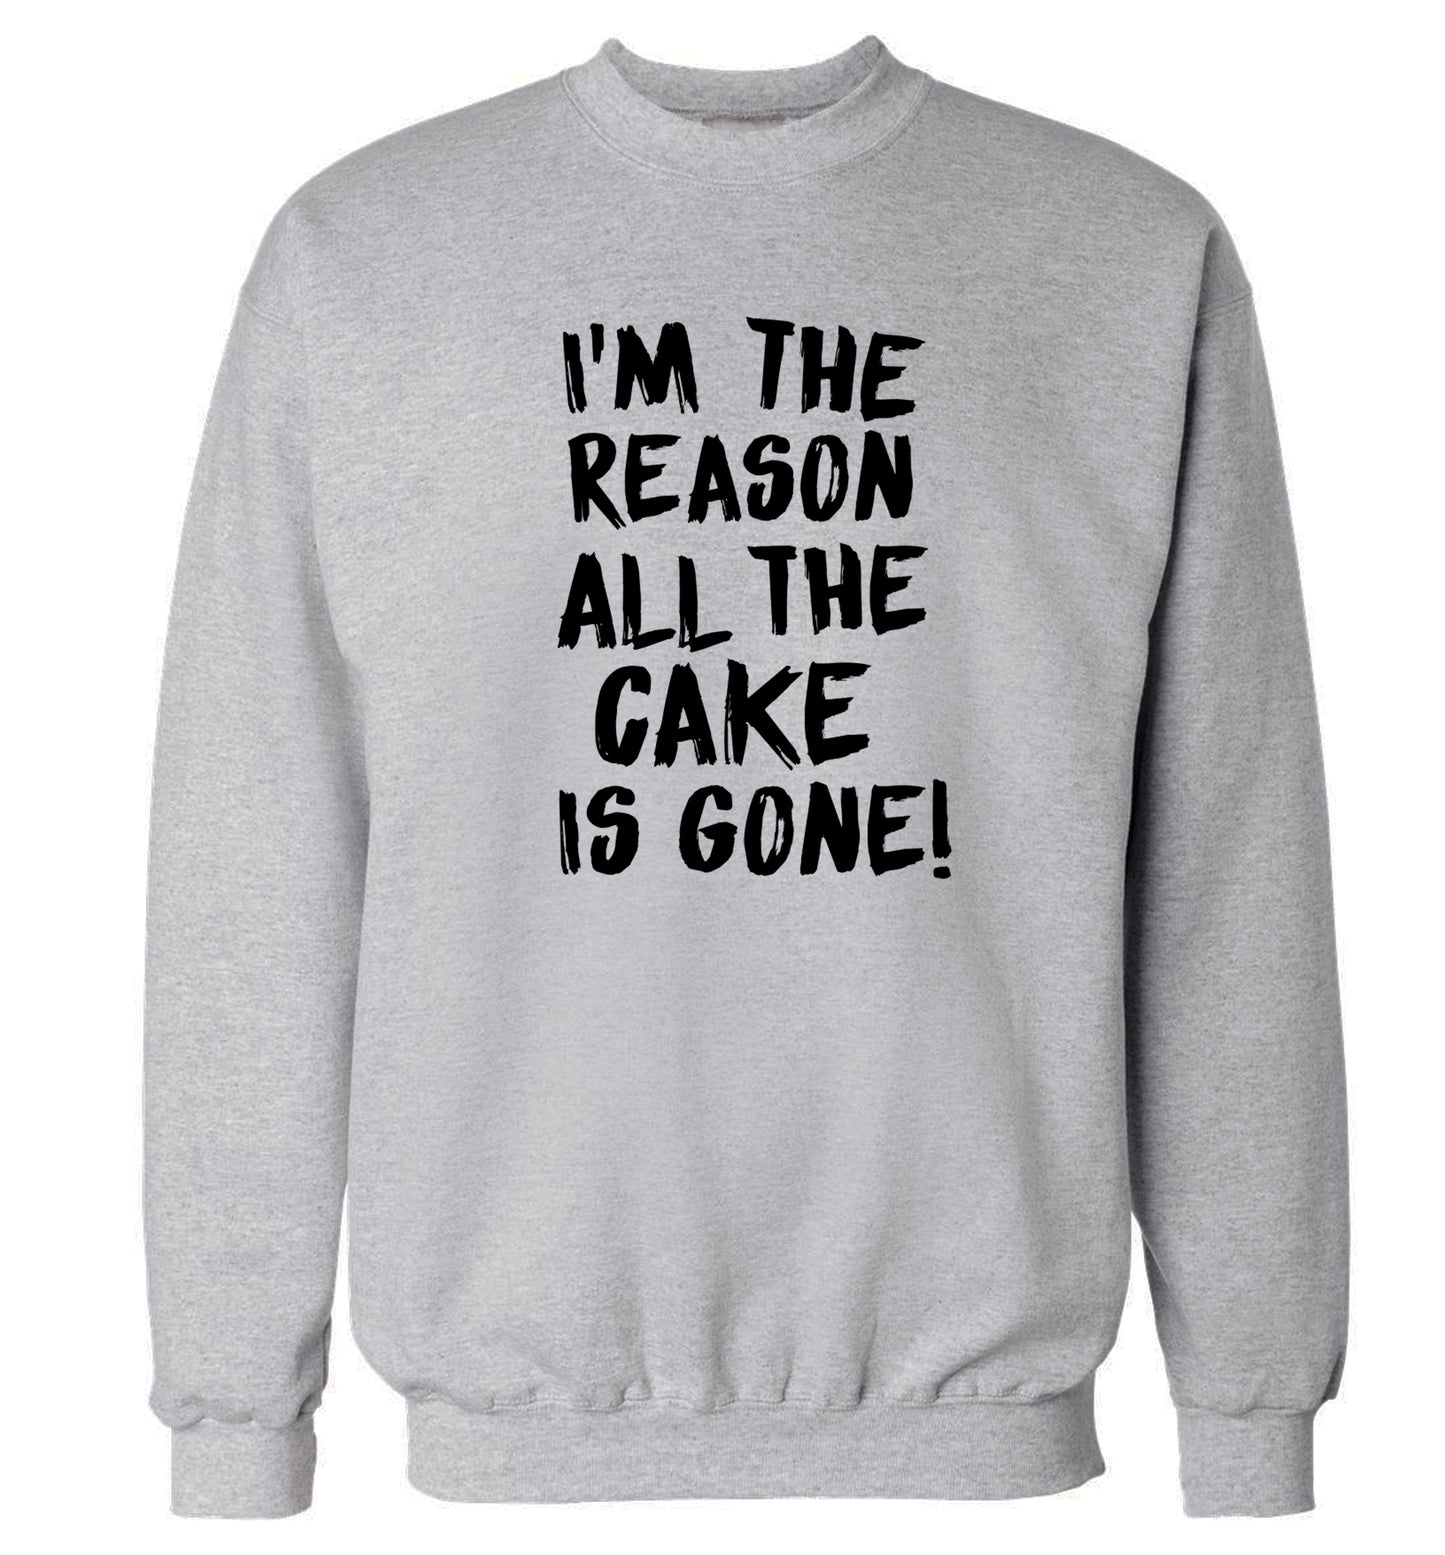 I'm the reason all the cake is gone Adult's unisex grey Sweater 2XL